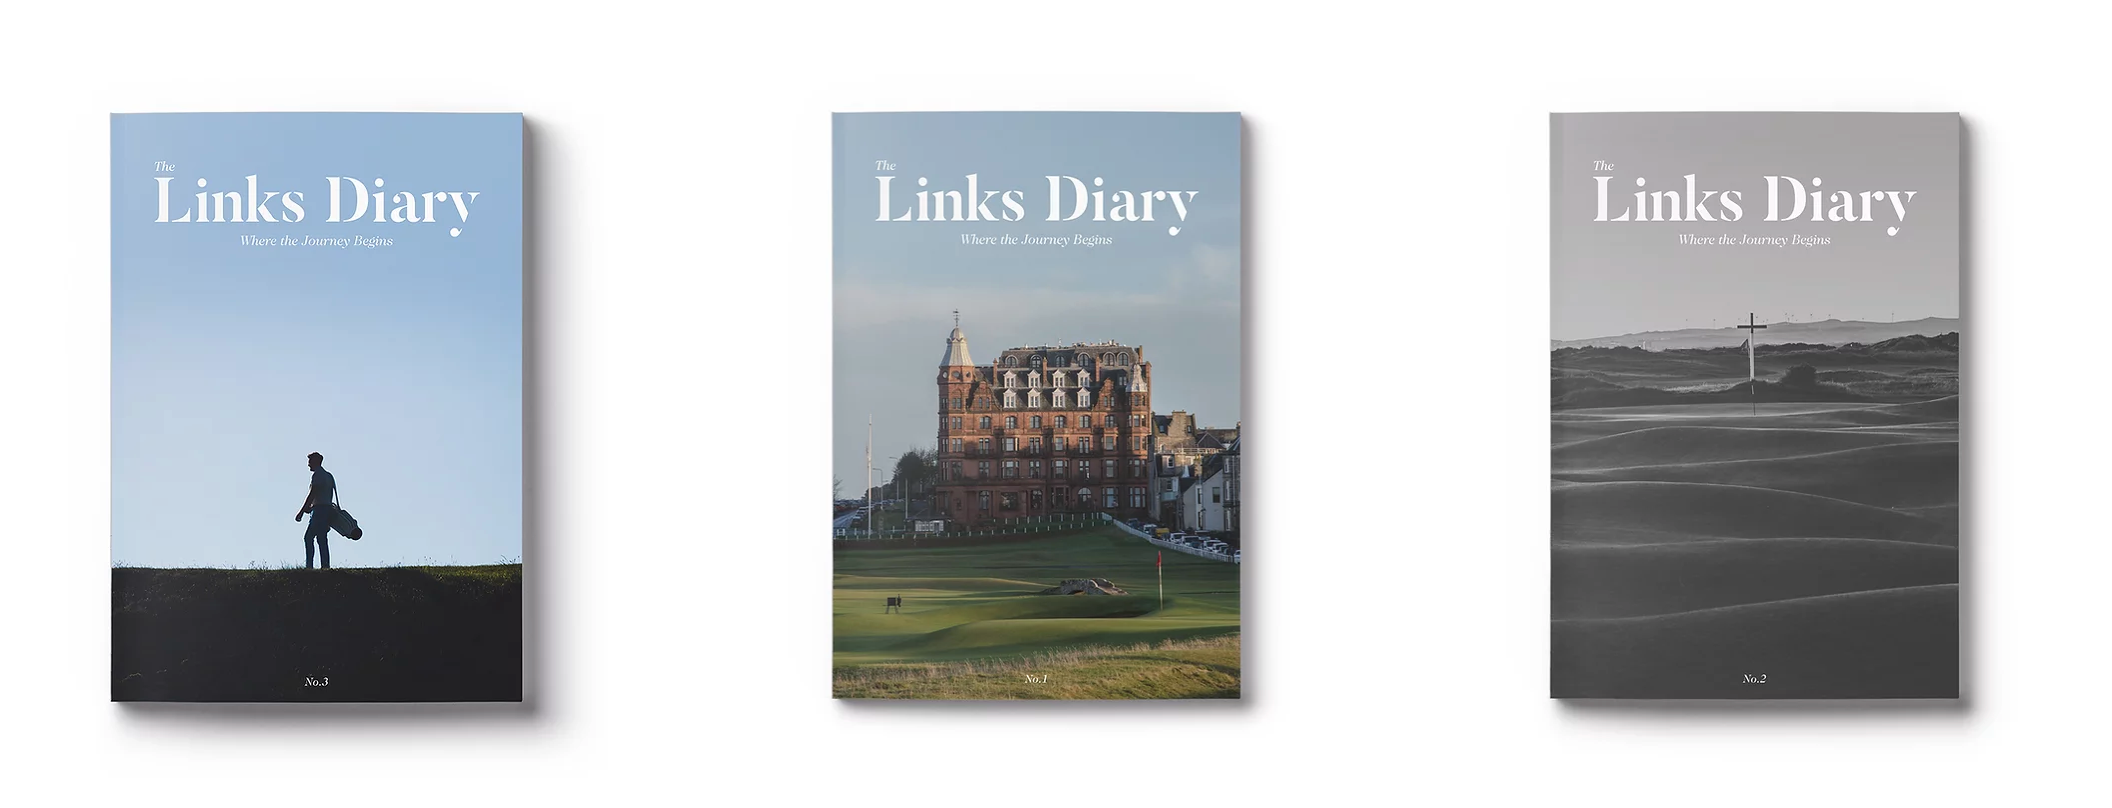 The Links Diary